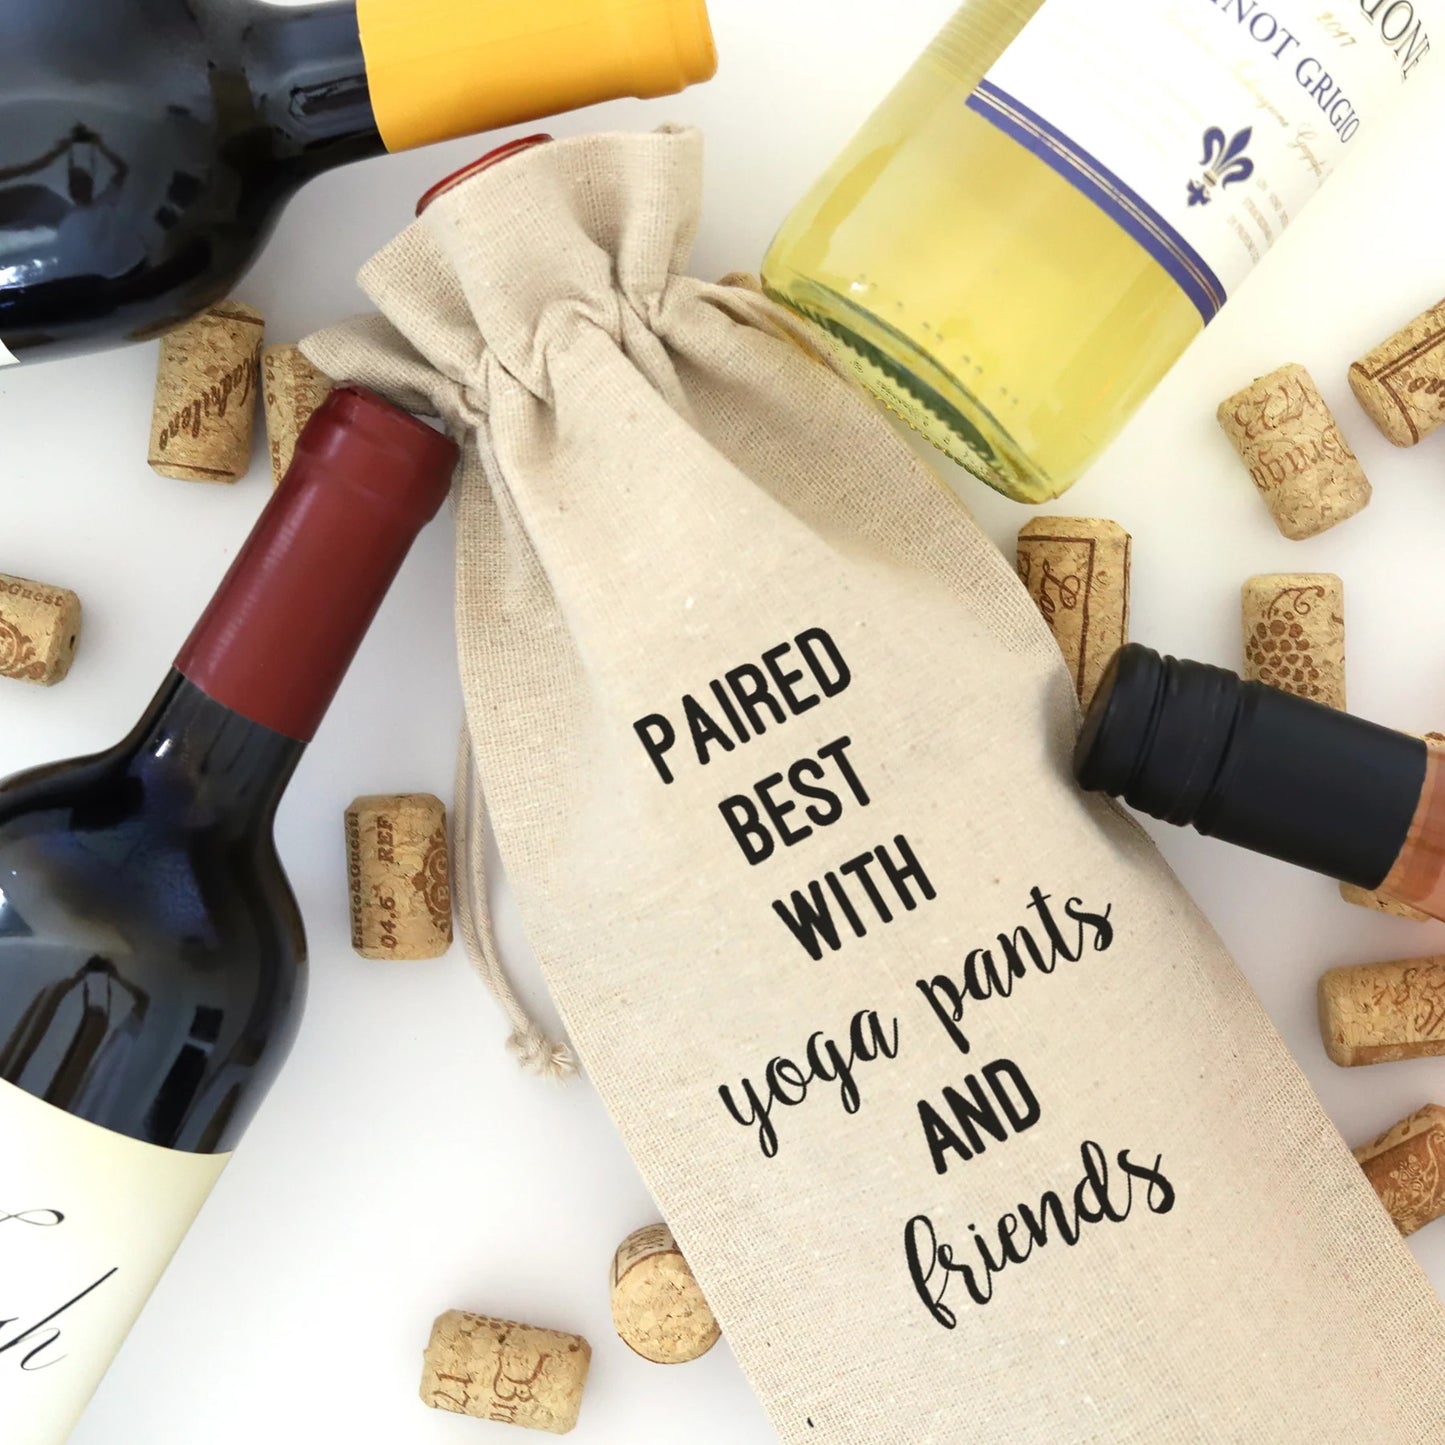 A wine bag with the words "Paired best with yoga pants and friend" printed on it.